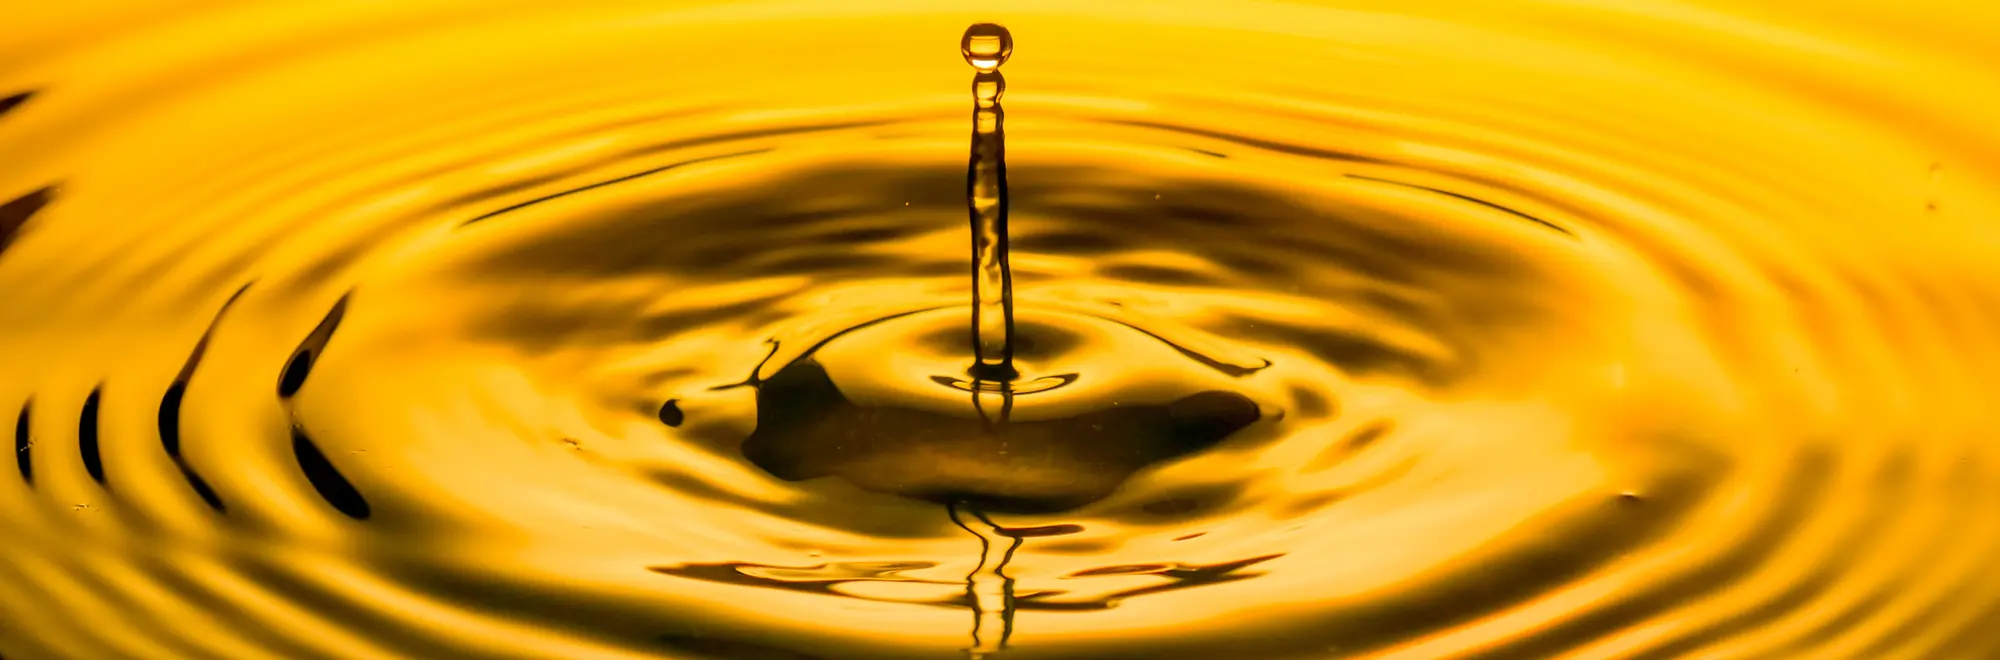 What benefits does cold extracted oil provide?